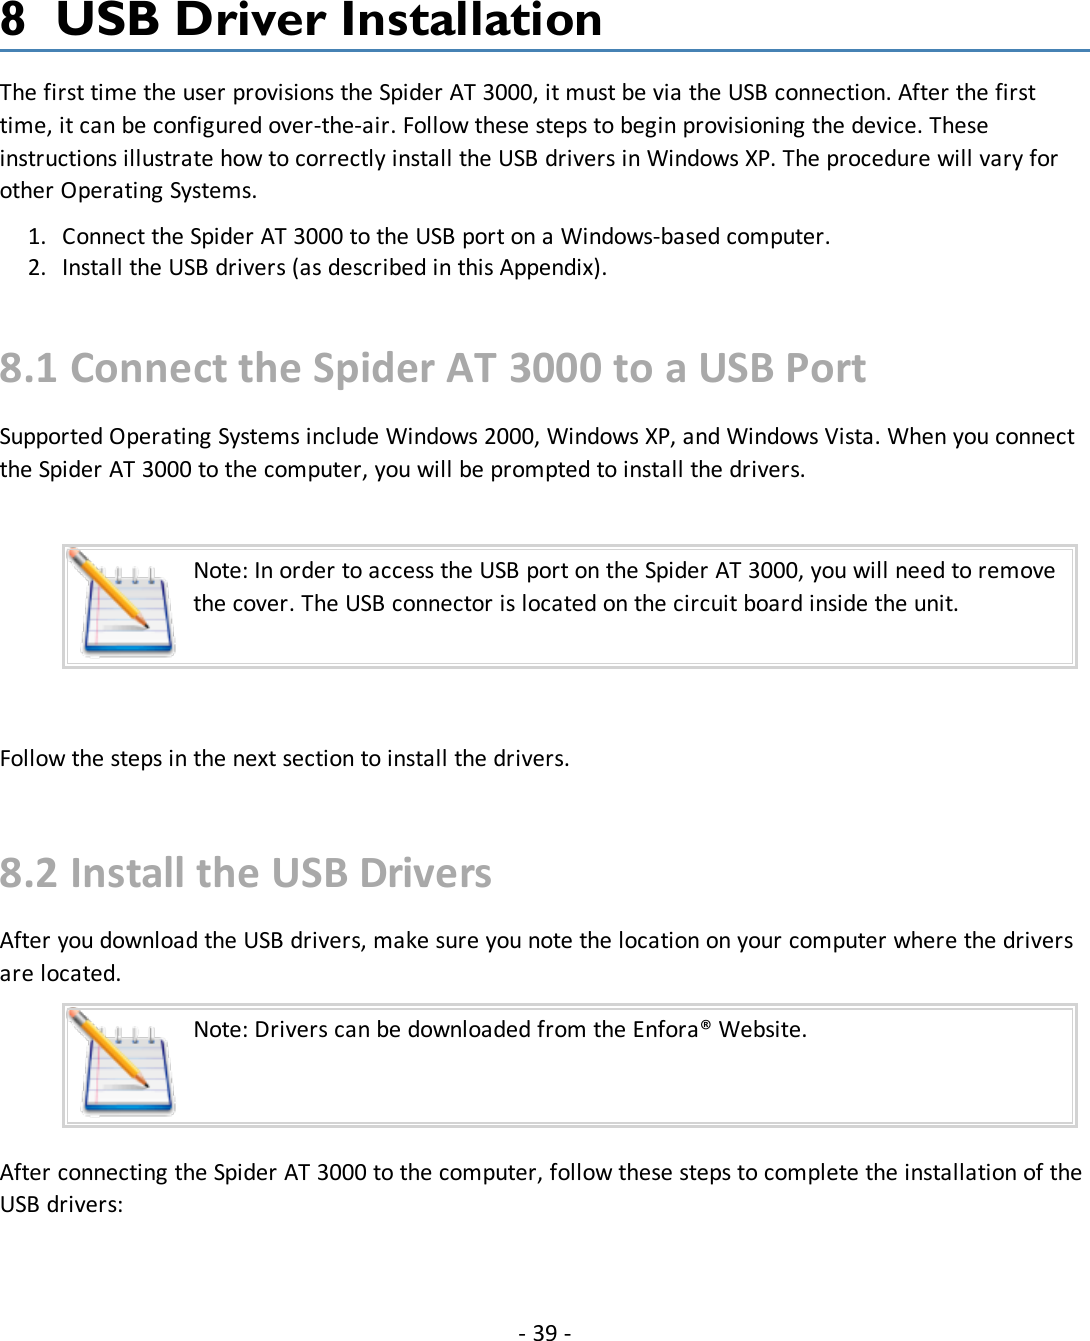 8 USB Driver InstallationThe first time the user provisions the Spider AT 3000, it must be via the USB connection. After the firsttime, it can be configured over-the-air. Follow these steps to begin provisioning the device. Theseinstructions illustrate how to correctly install the USB drivers in Windows XP. The procedure will vary forother Operating Systems.1. Connect the Spider AT 3000 to the USB port on a Windows-based computer.2. Install the USB drivers (as described in this Appendix).8.1 Connect the Spider AT 3000 to a USB PortSupported Operating Systems include Windows 2000, Windows XP, and Windows Vista. When you connectthe Spider AT 3000 to the computer, you will be prompted to install the drivers.Note: In order to access the USB port on the Spider AT 3000, you will need to removethe cover. The USB connector is located on the circuit board inside the unit.Follow the steps in the next section to install the drivers.8.2 Install the USBDriversAfter you download the USB drivers, make sure you note the location on your computer where the driversare located.Note: Drivers can be downloaded from the Enfora® Website.After connecting the Spider AT 3000 to the computer, follow these steps to complete the installation of theUSB drivers:- 39 -